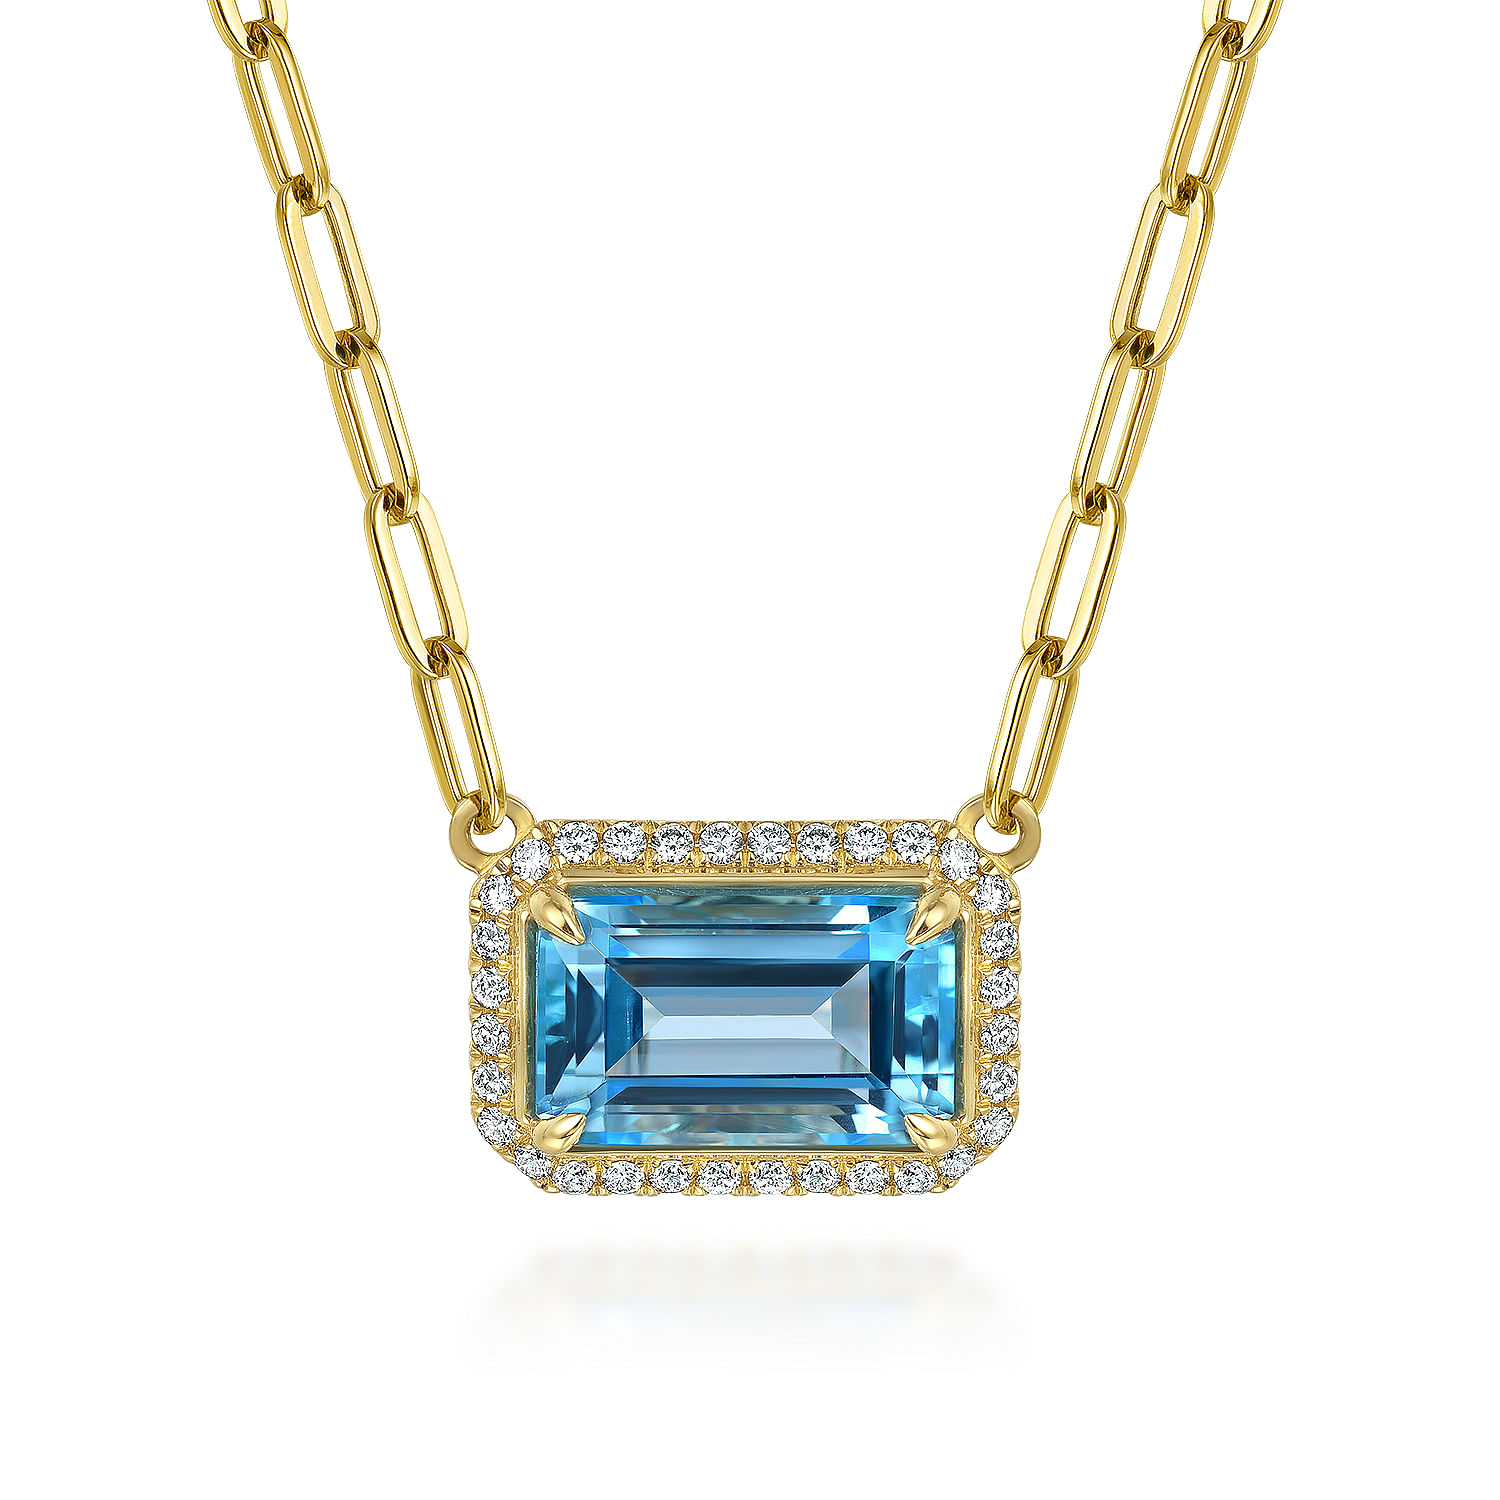 Gabriel - 14K Yellow Gold Diamond and Blue Topaz Emerald Cut Necklace With Flower Pattern Gallery